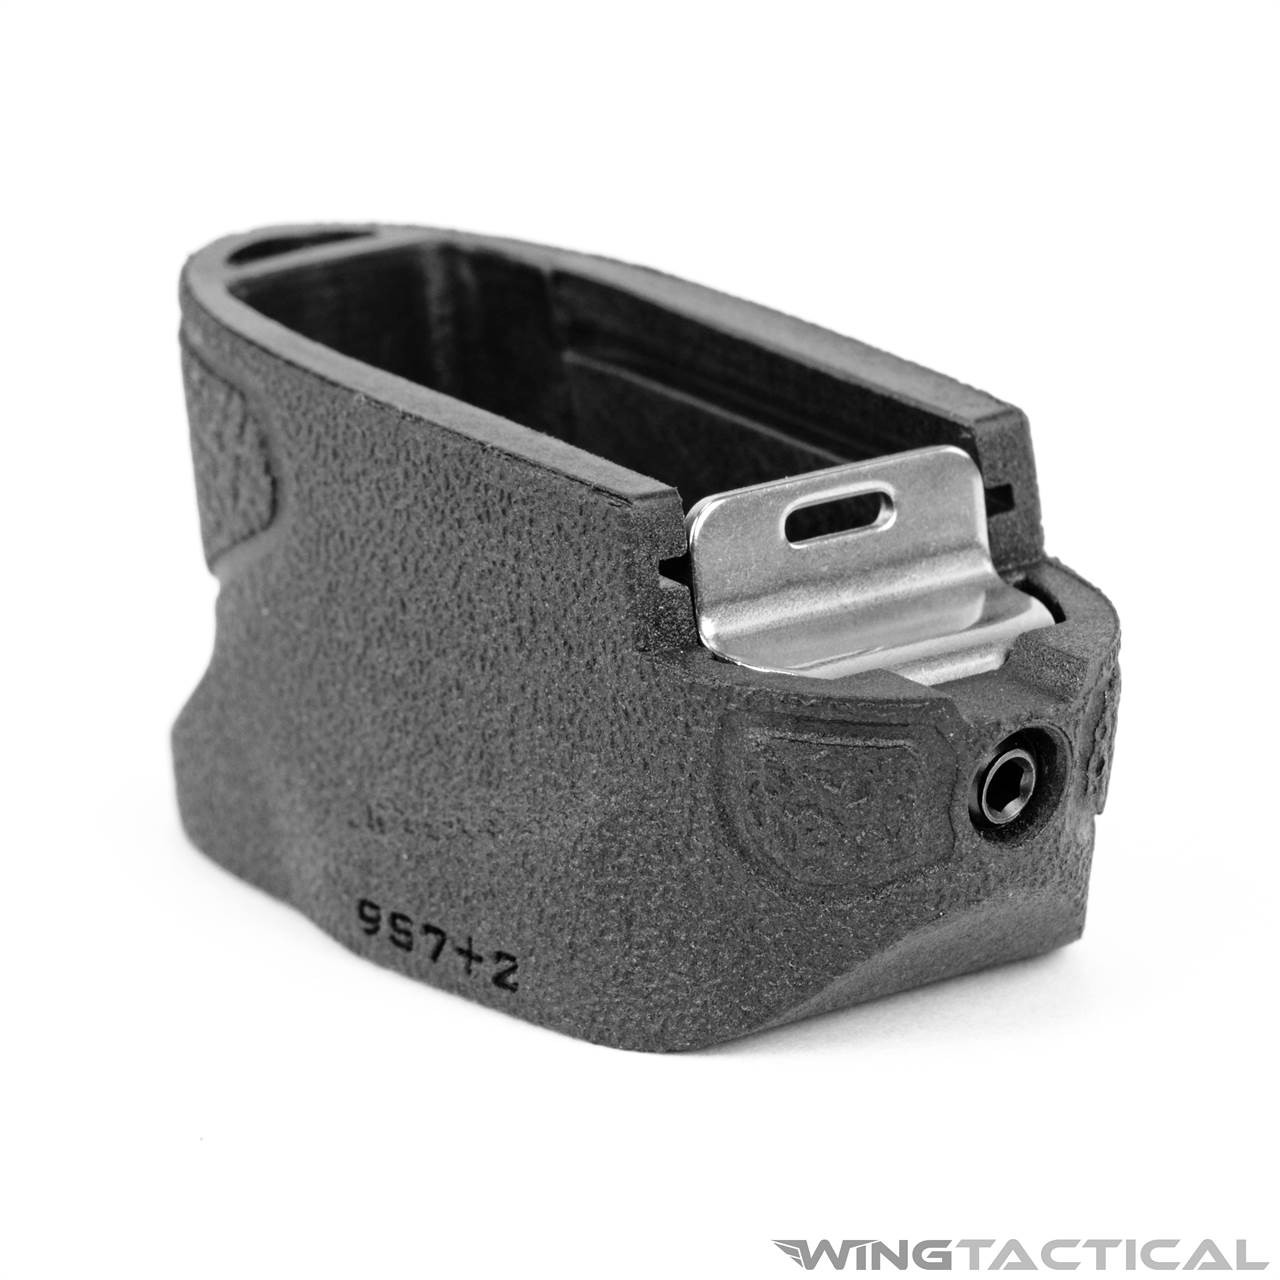 Strike Industries Smith & Wesson M&P Shield Magazine Extension (9mm & .40 S&W)